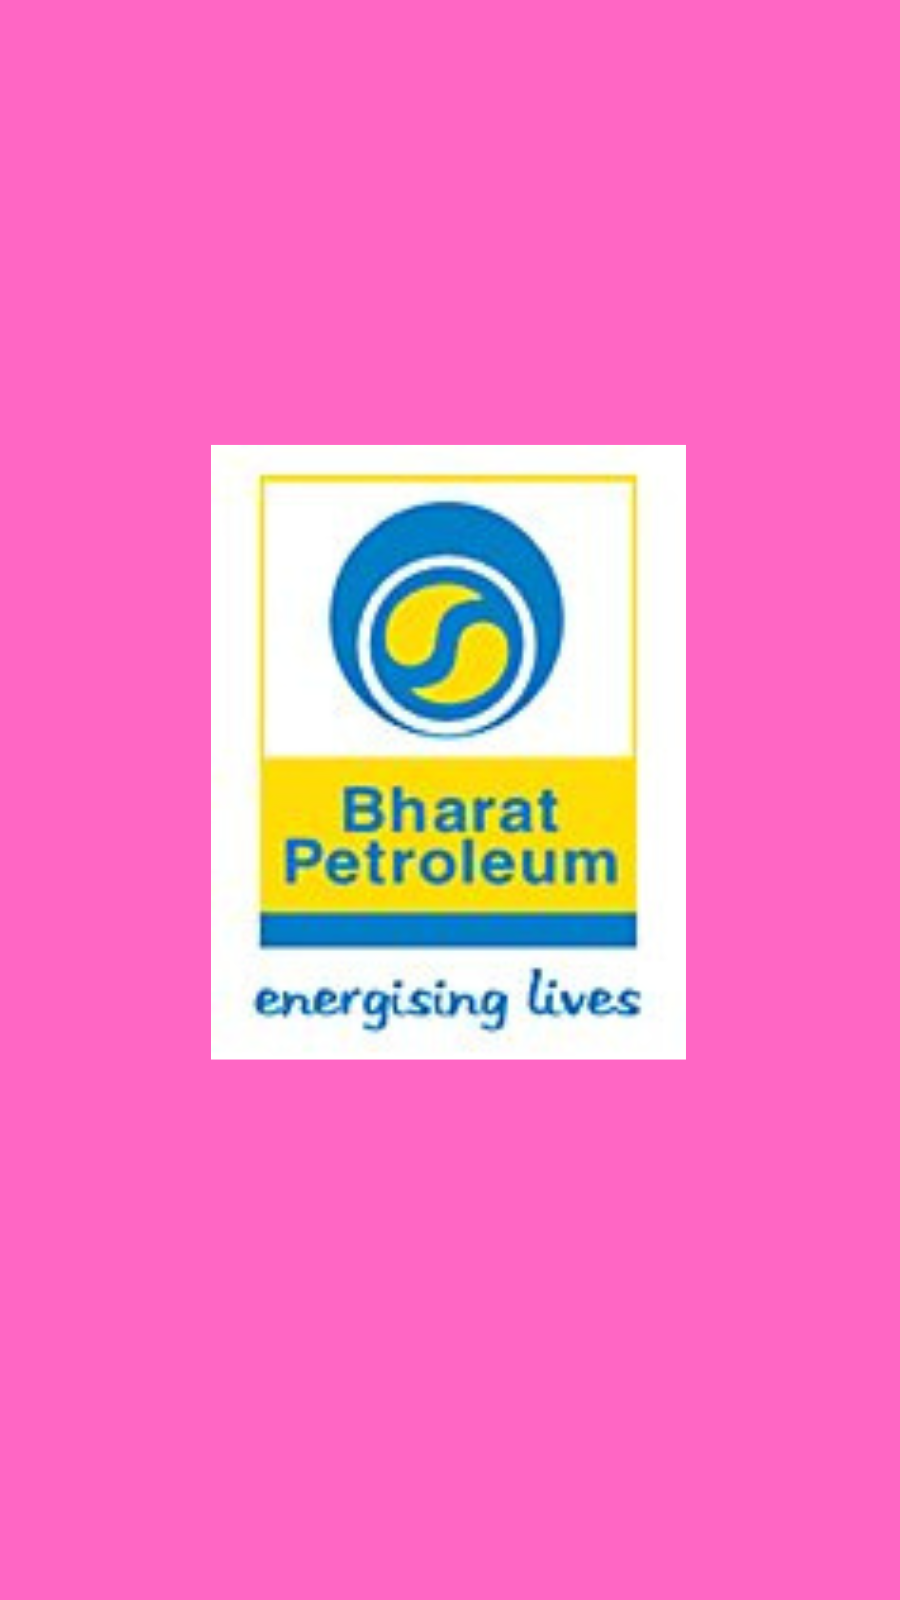 BPCL in rural India